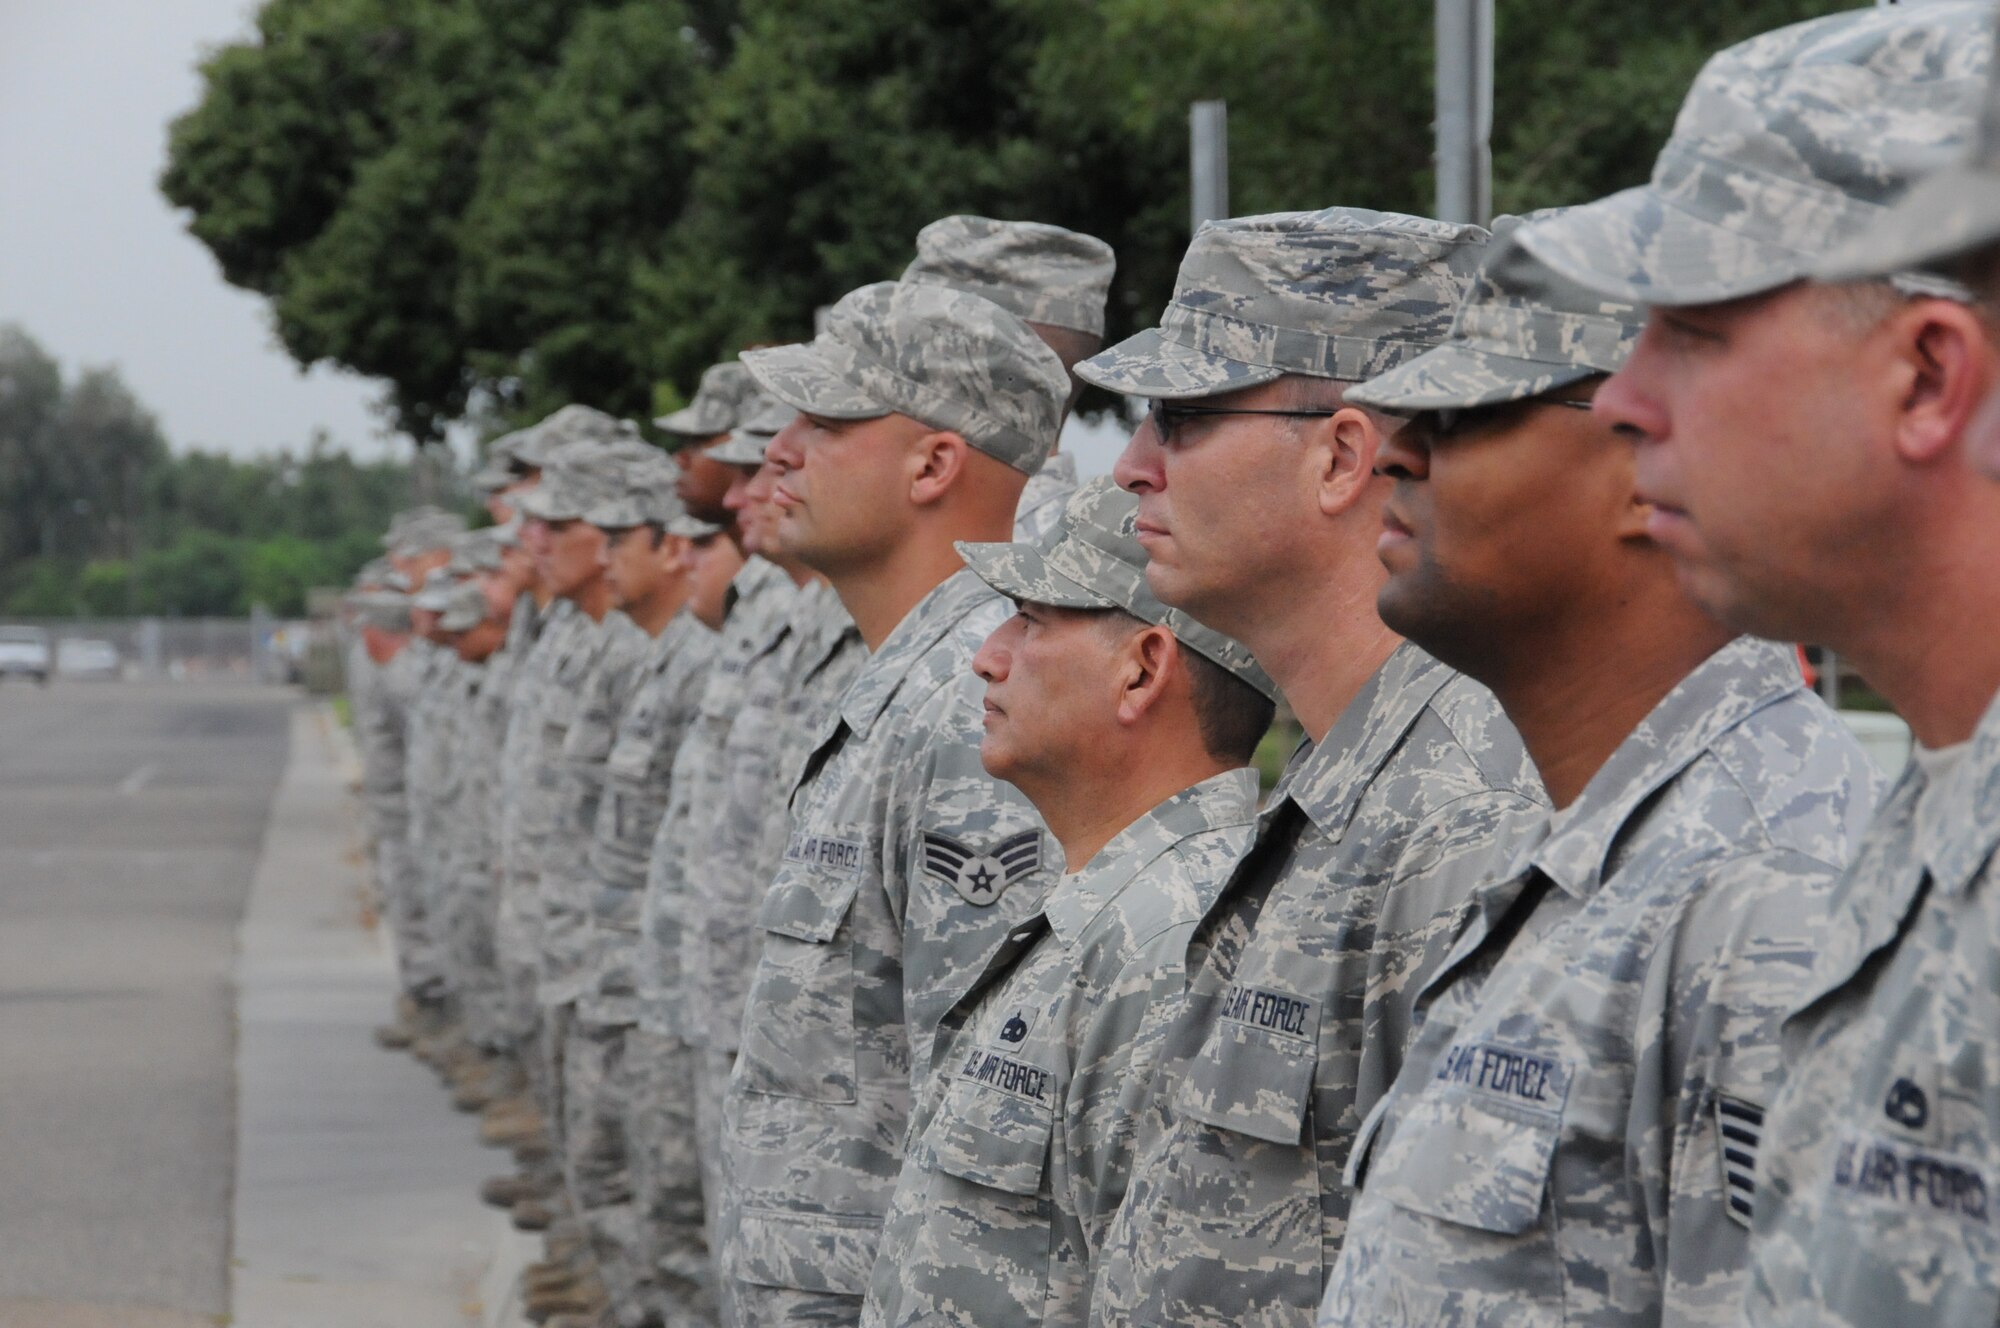 File:California Army National Guard honors their best warriors  111023-A-XQ016-023.jpg - Wikimedia Commons